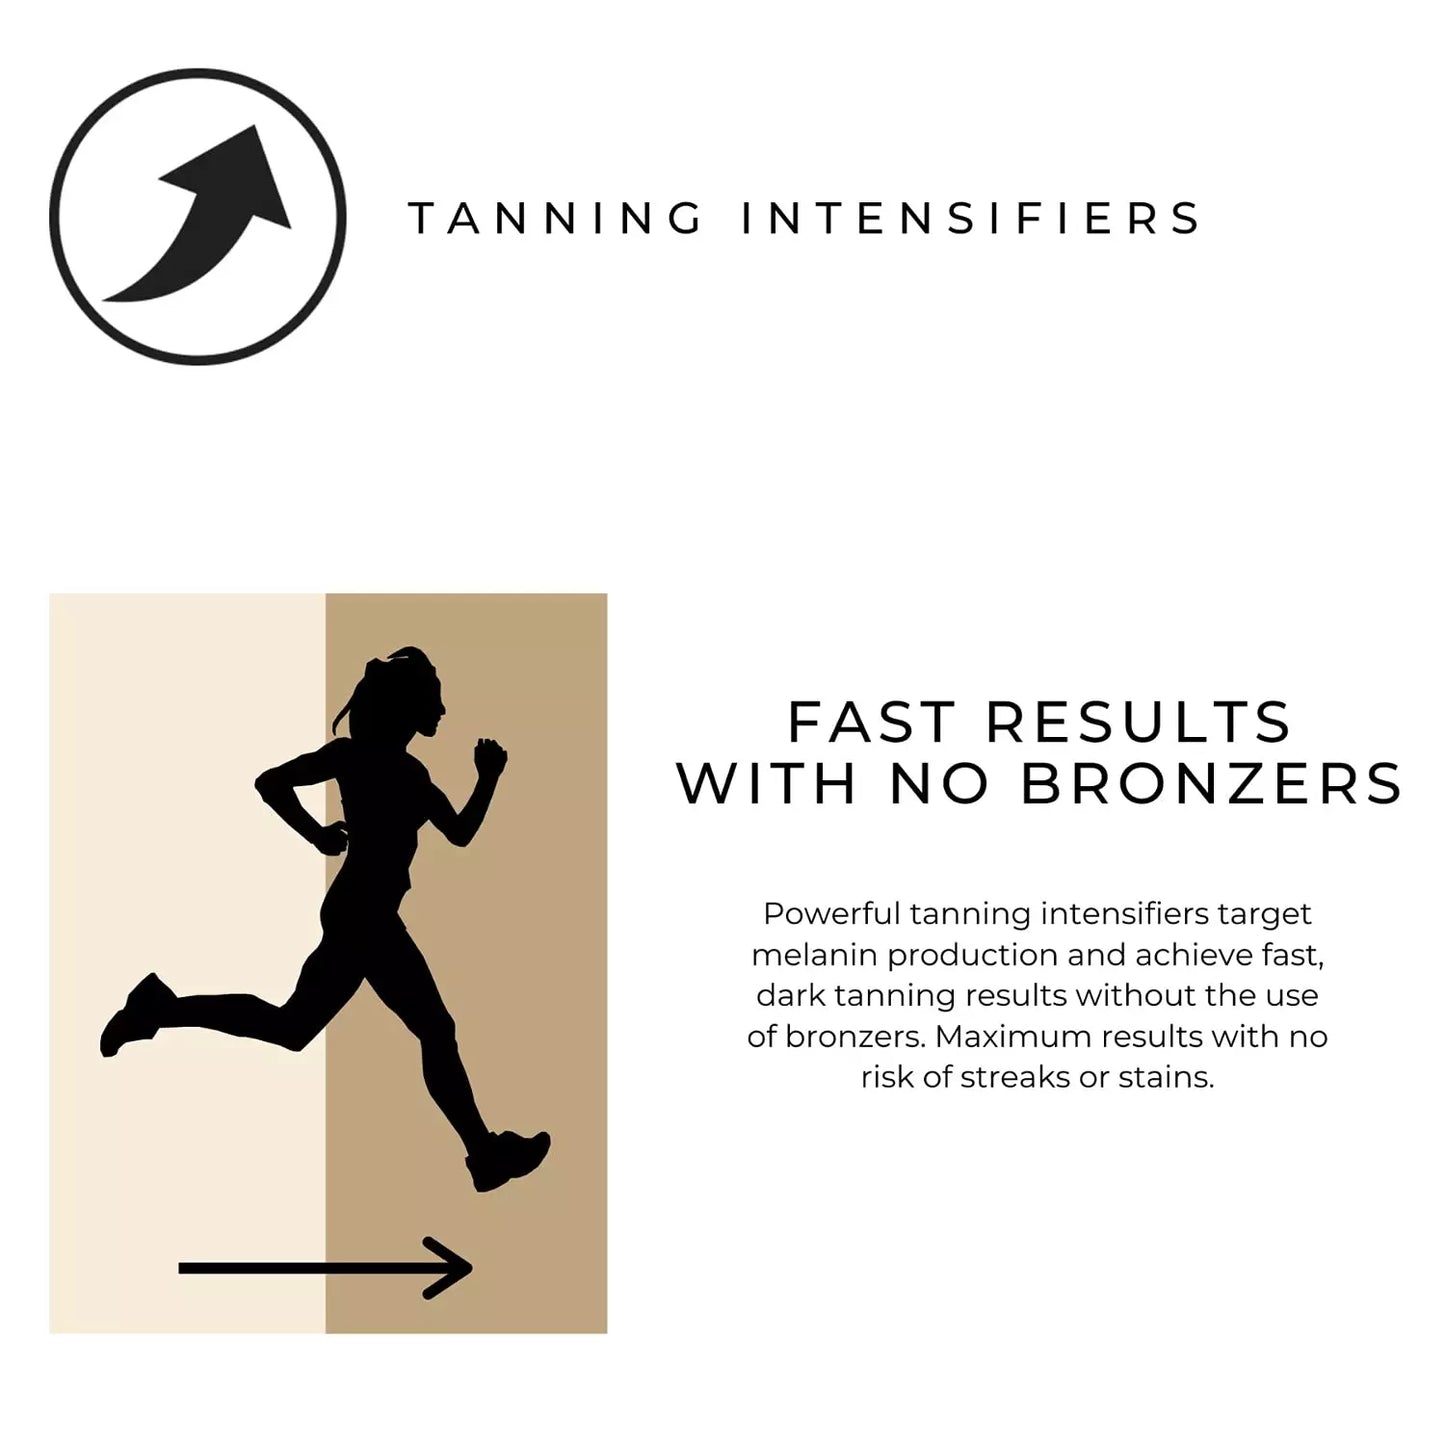 Mystery tanning intensifier with no bronzers